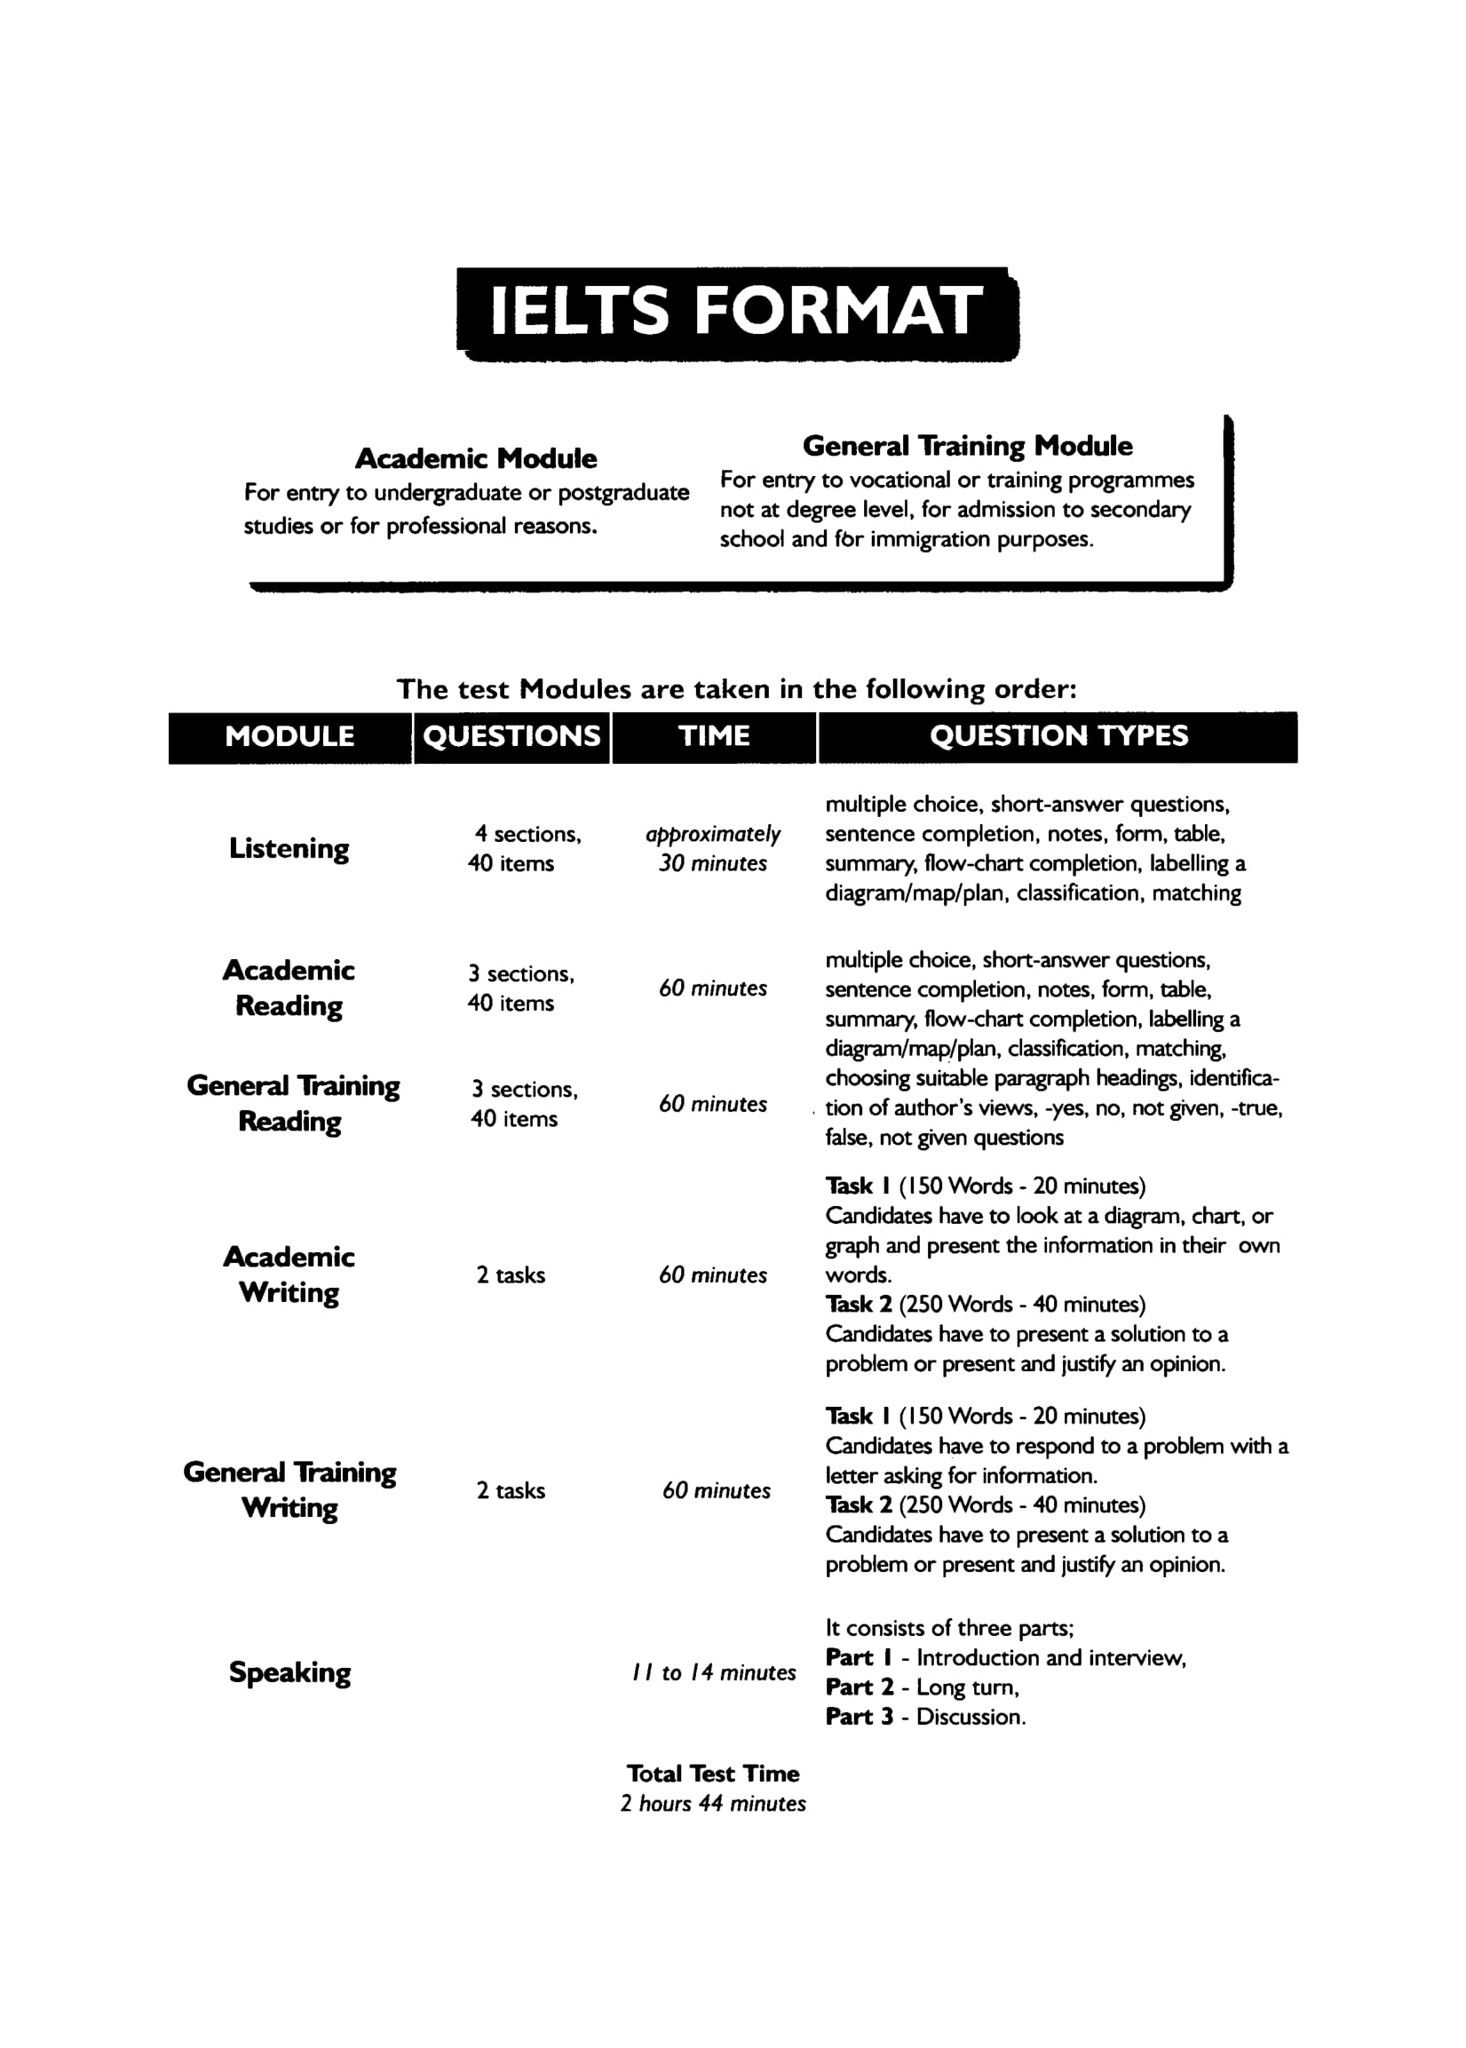 Chess-playing computer - IELTS Reading: paragraph headings - IELTS Success  with Kiwiprofesor